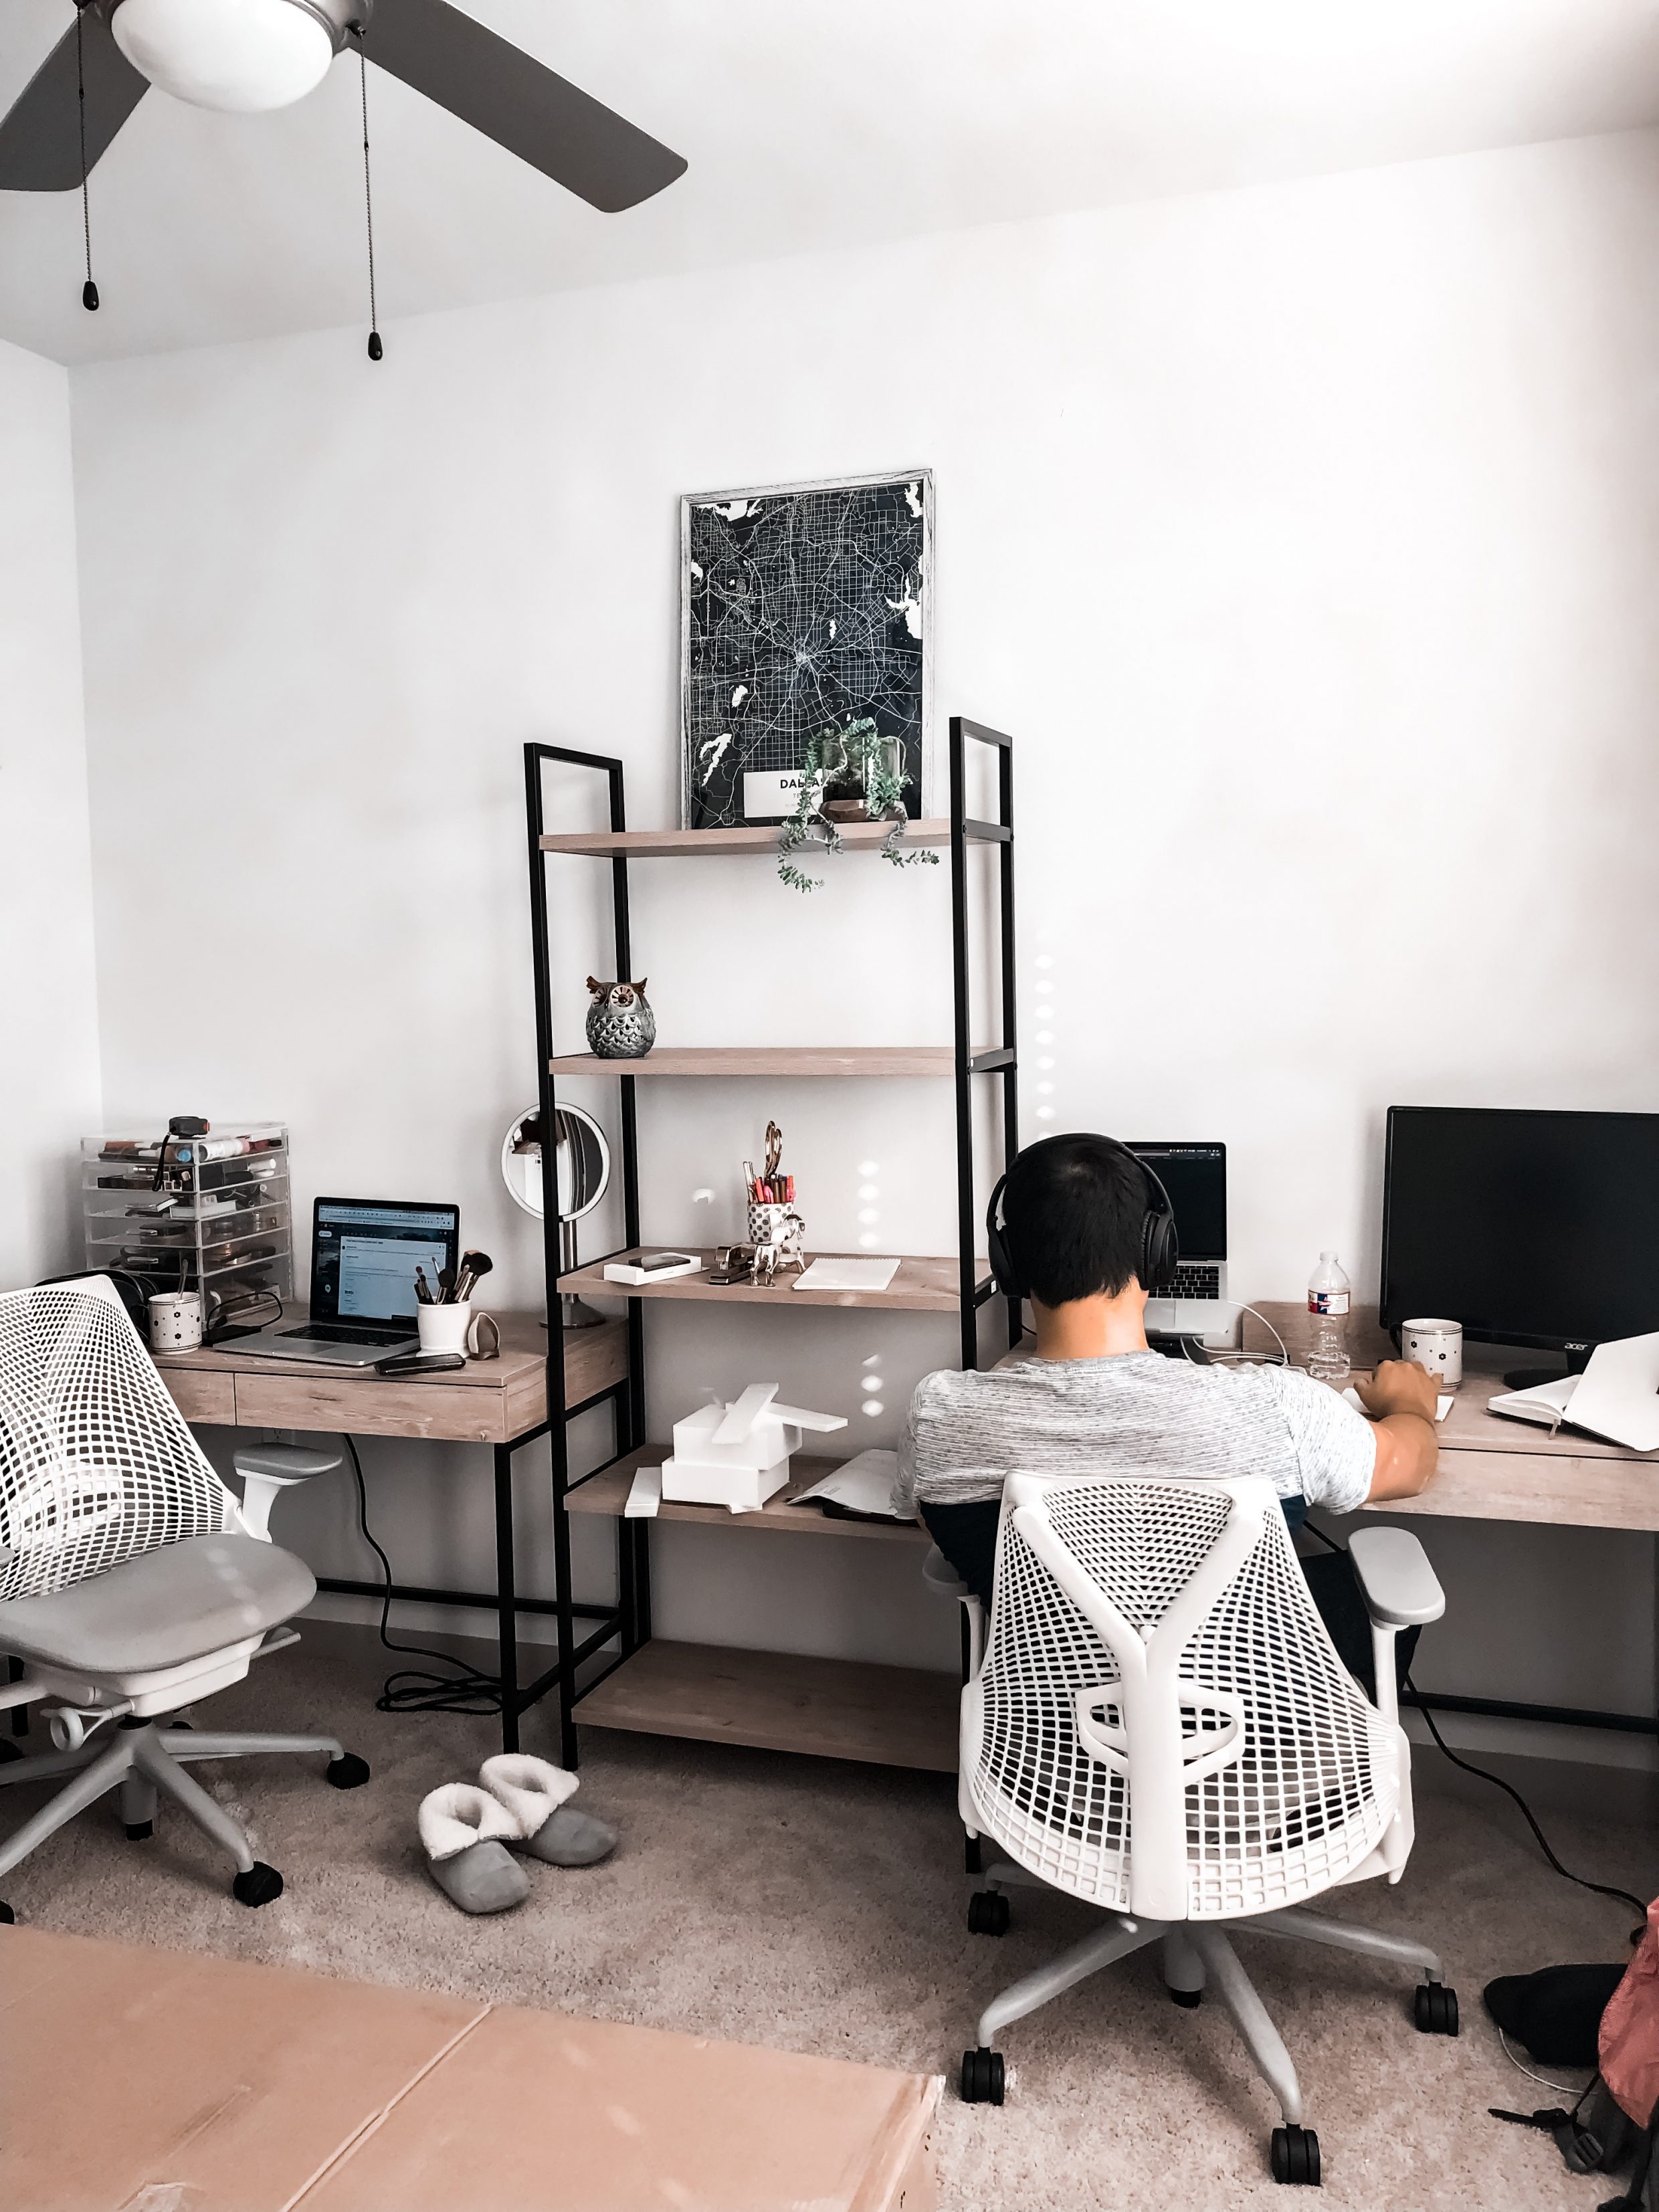 Blogger Hoang-Kim of Colorandchic.com shares the beginning phase of her new home office